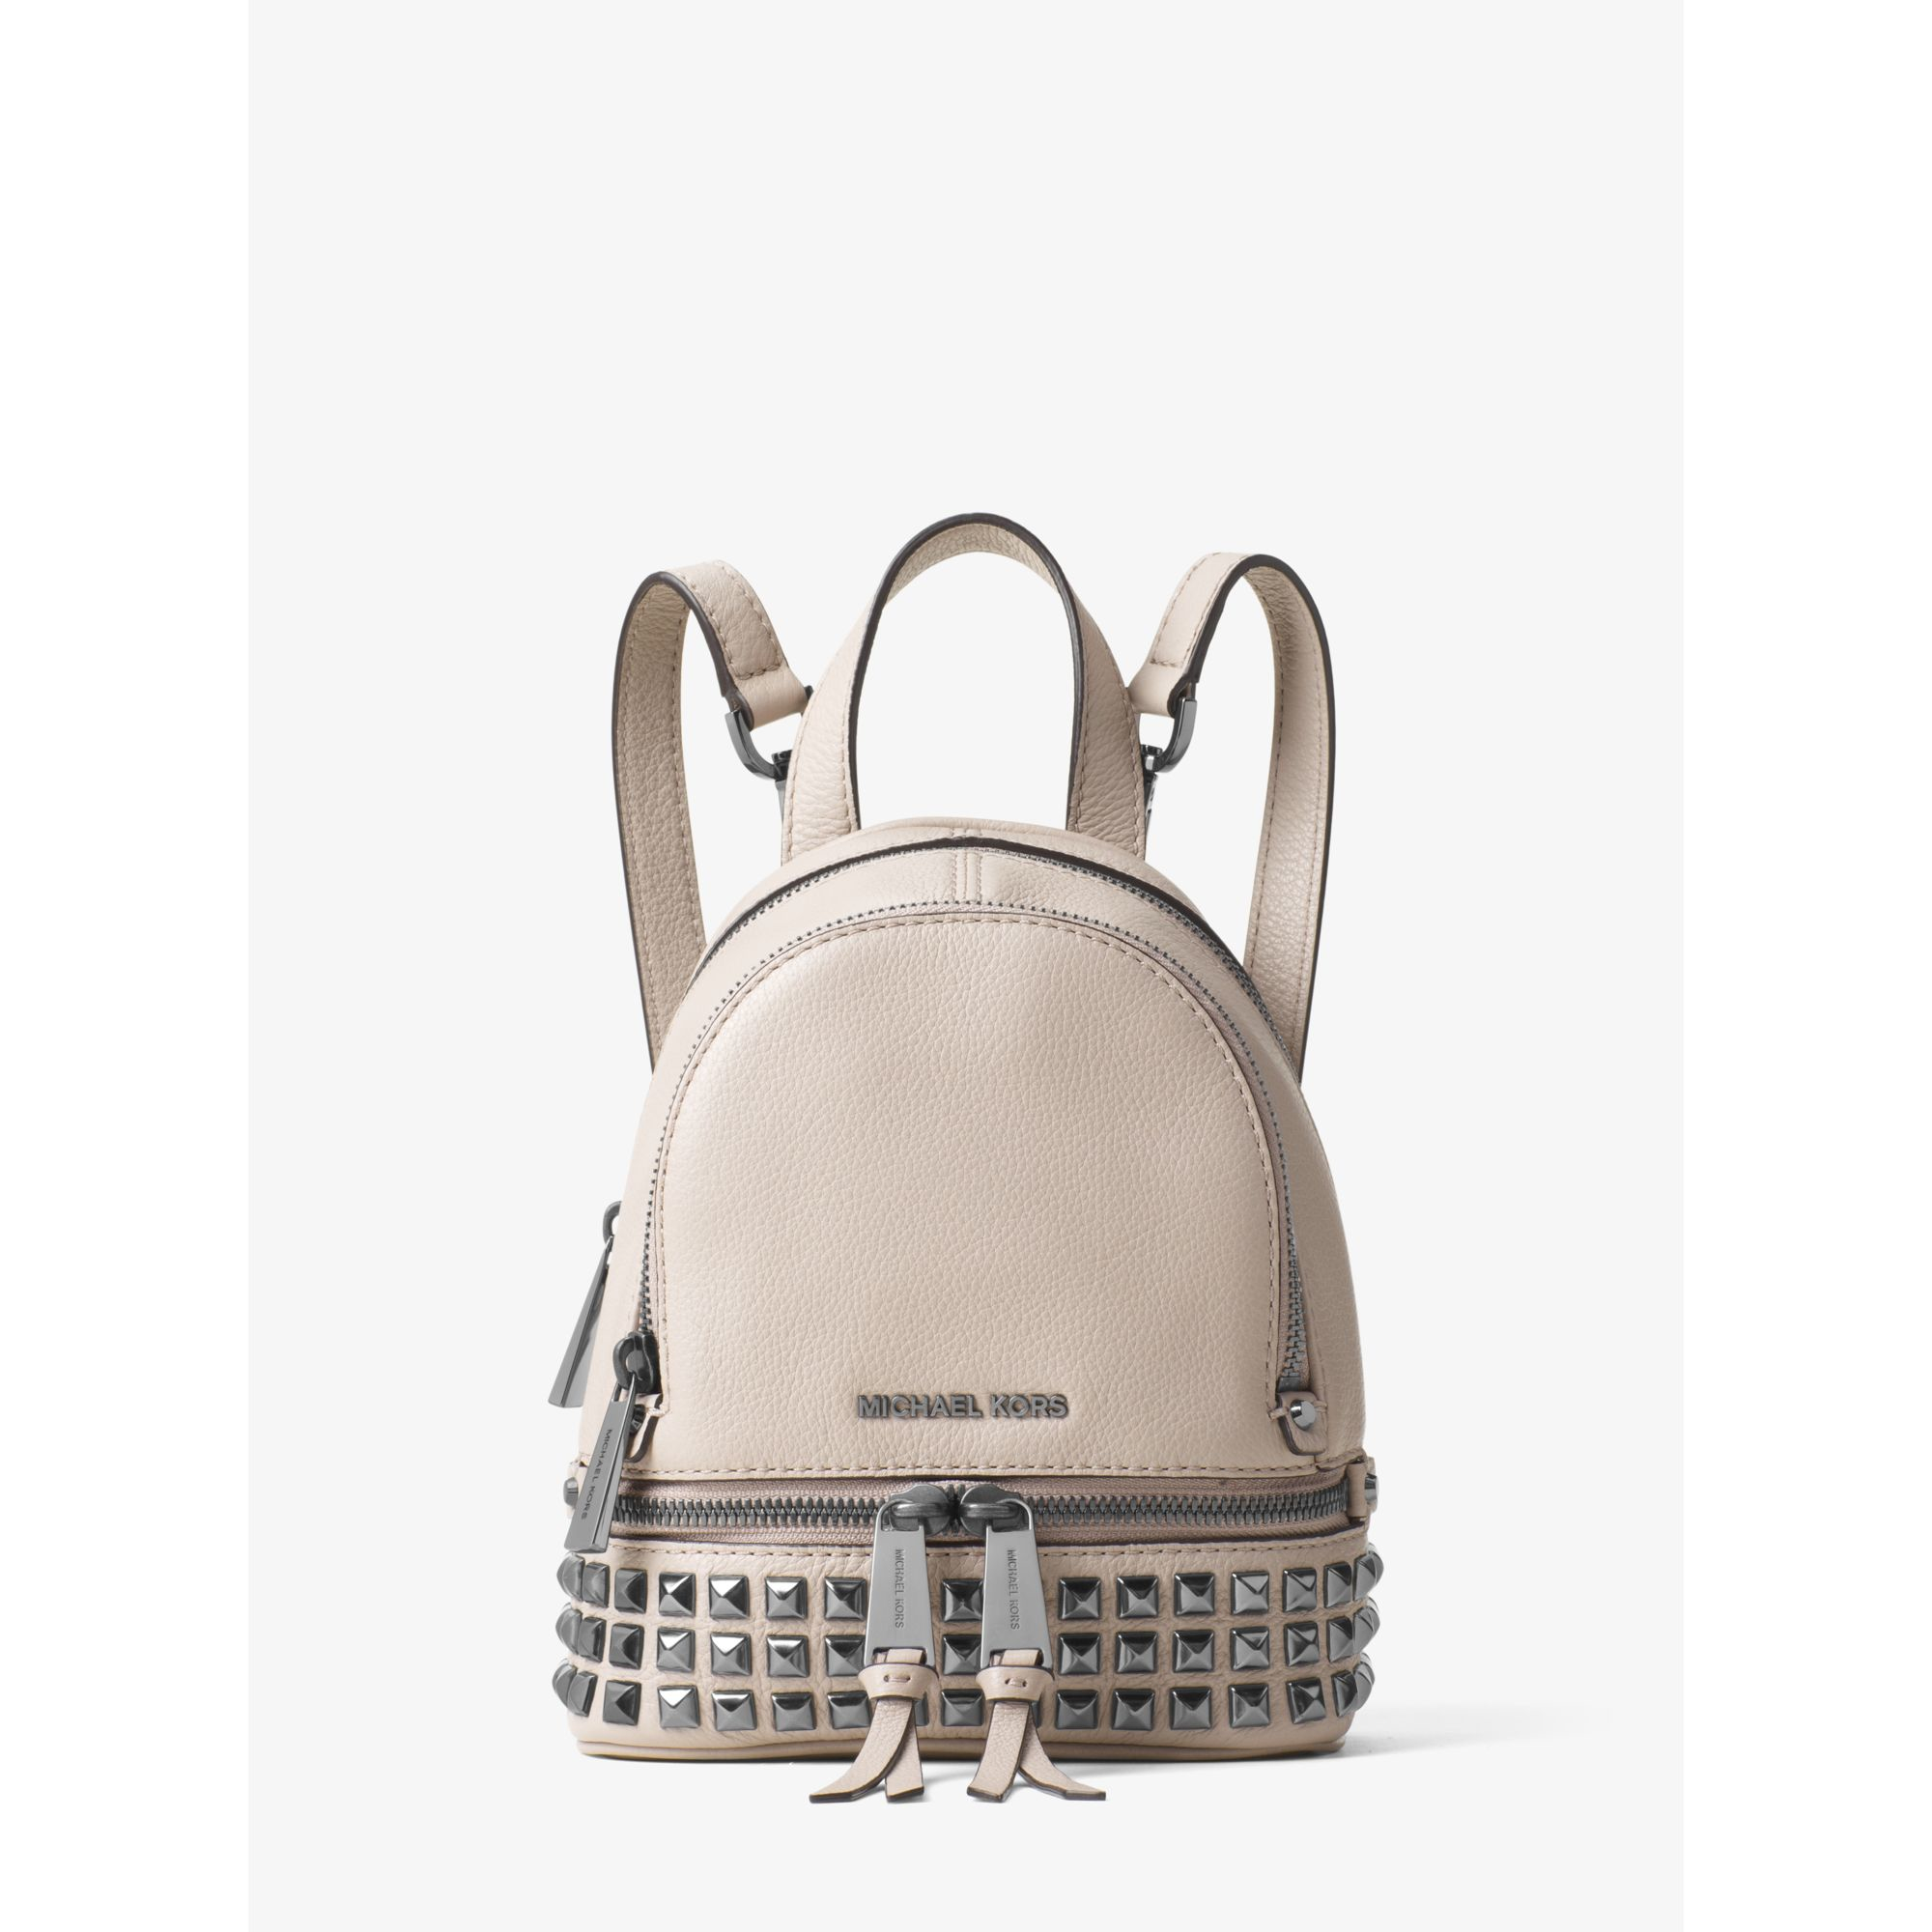 Michael Kors Rhea Extra-small Studded Leather Backpack in Gray - Lyst